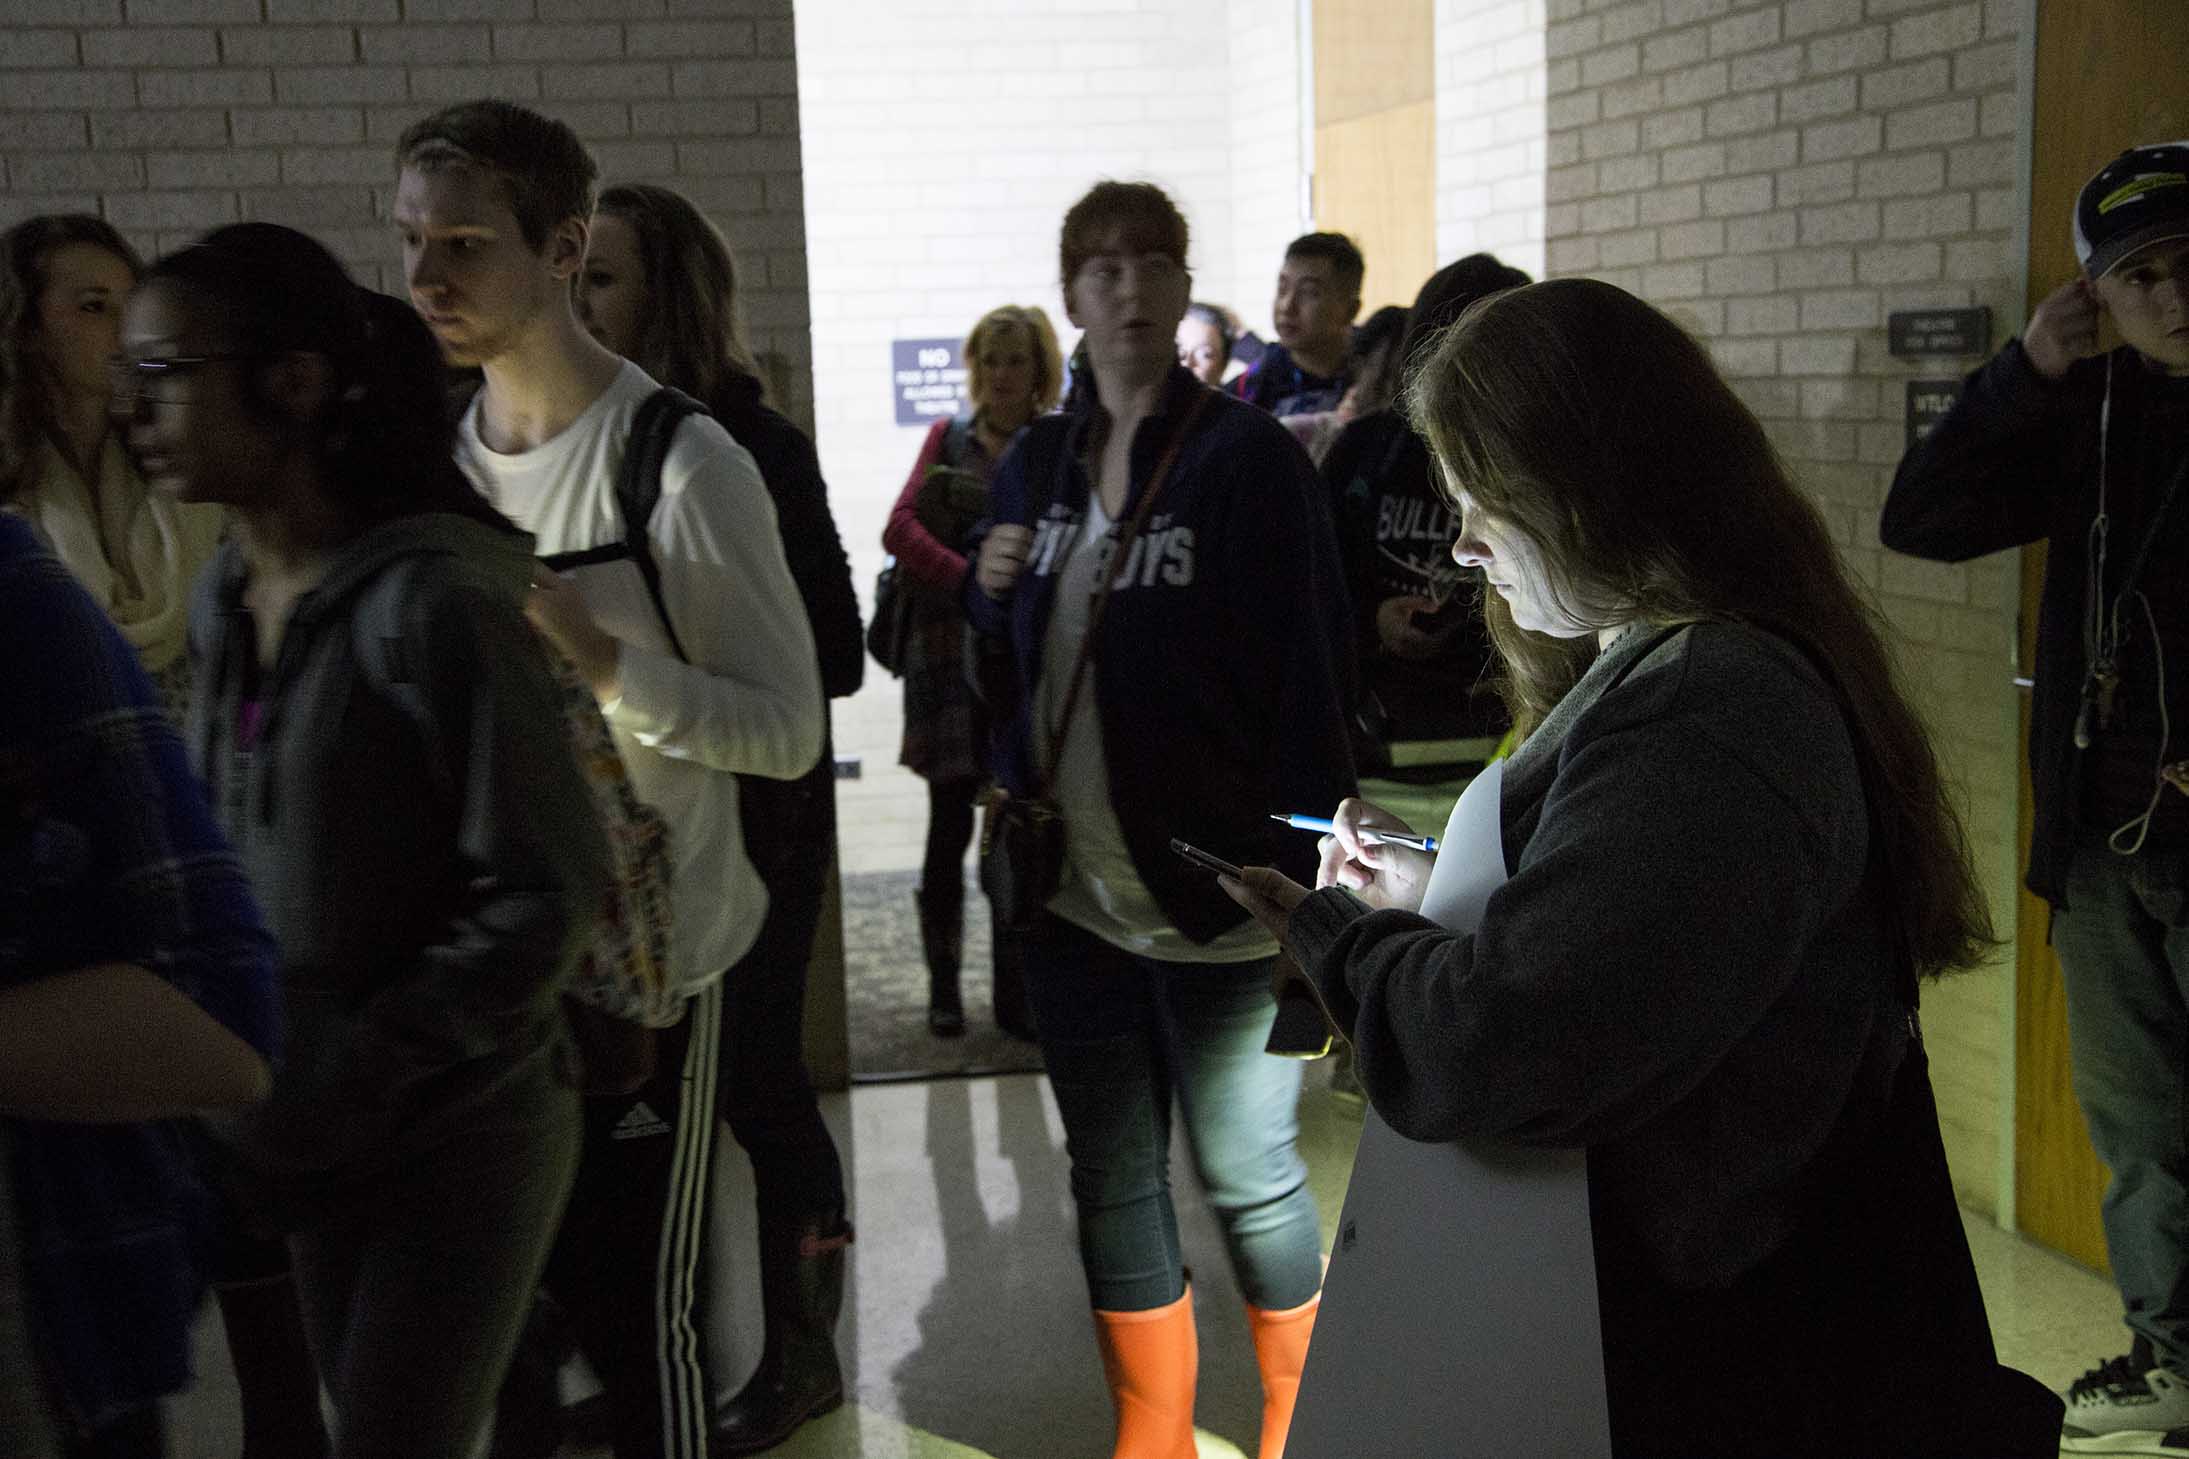 Flashlights and cellphones illuminate the corridors as NW students are escorted to the theater to wait for the storm to pass.